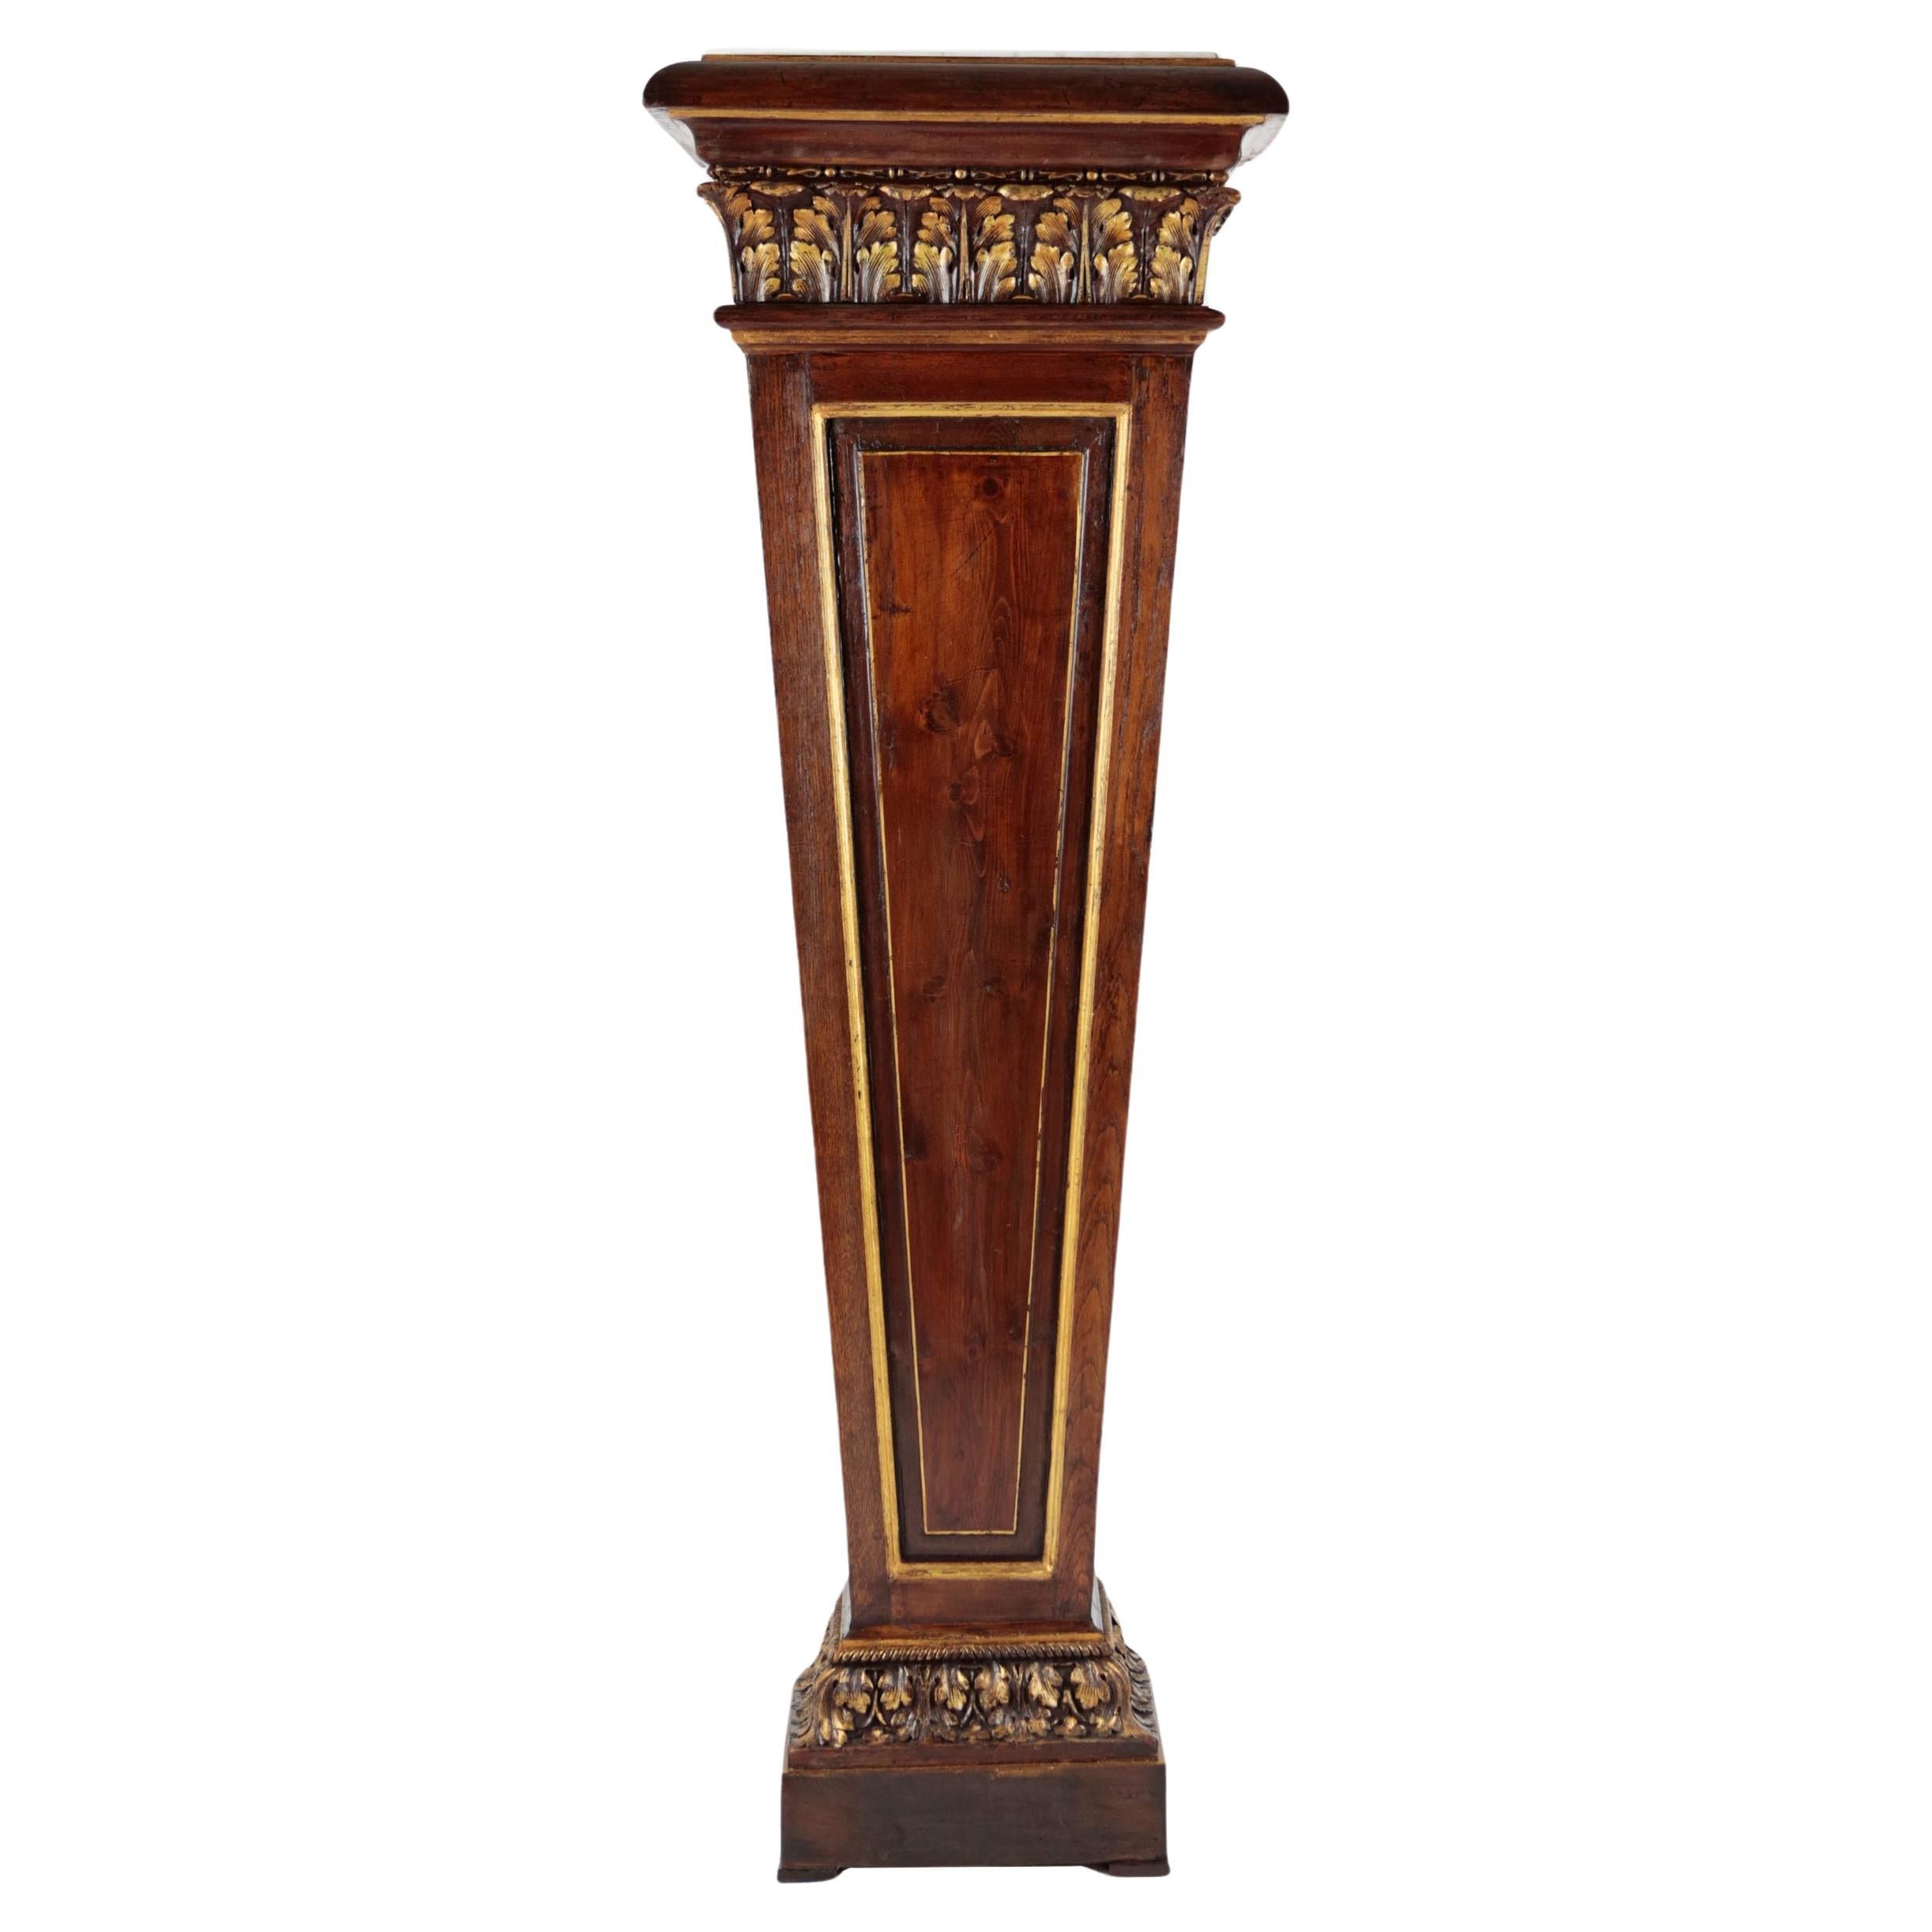 Pedestal 2nd Half 19th Century Nutwood and Marble Top